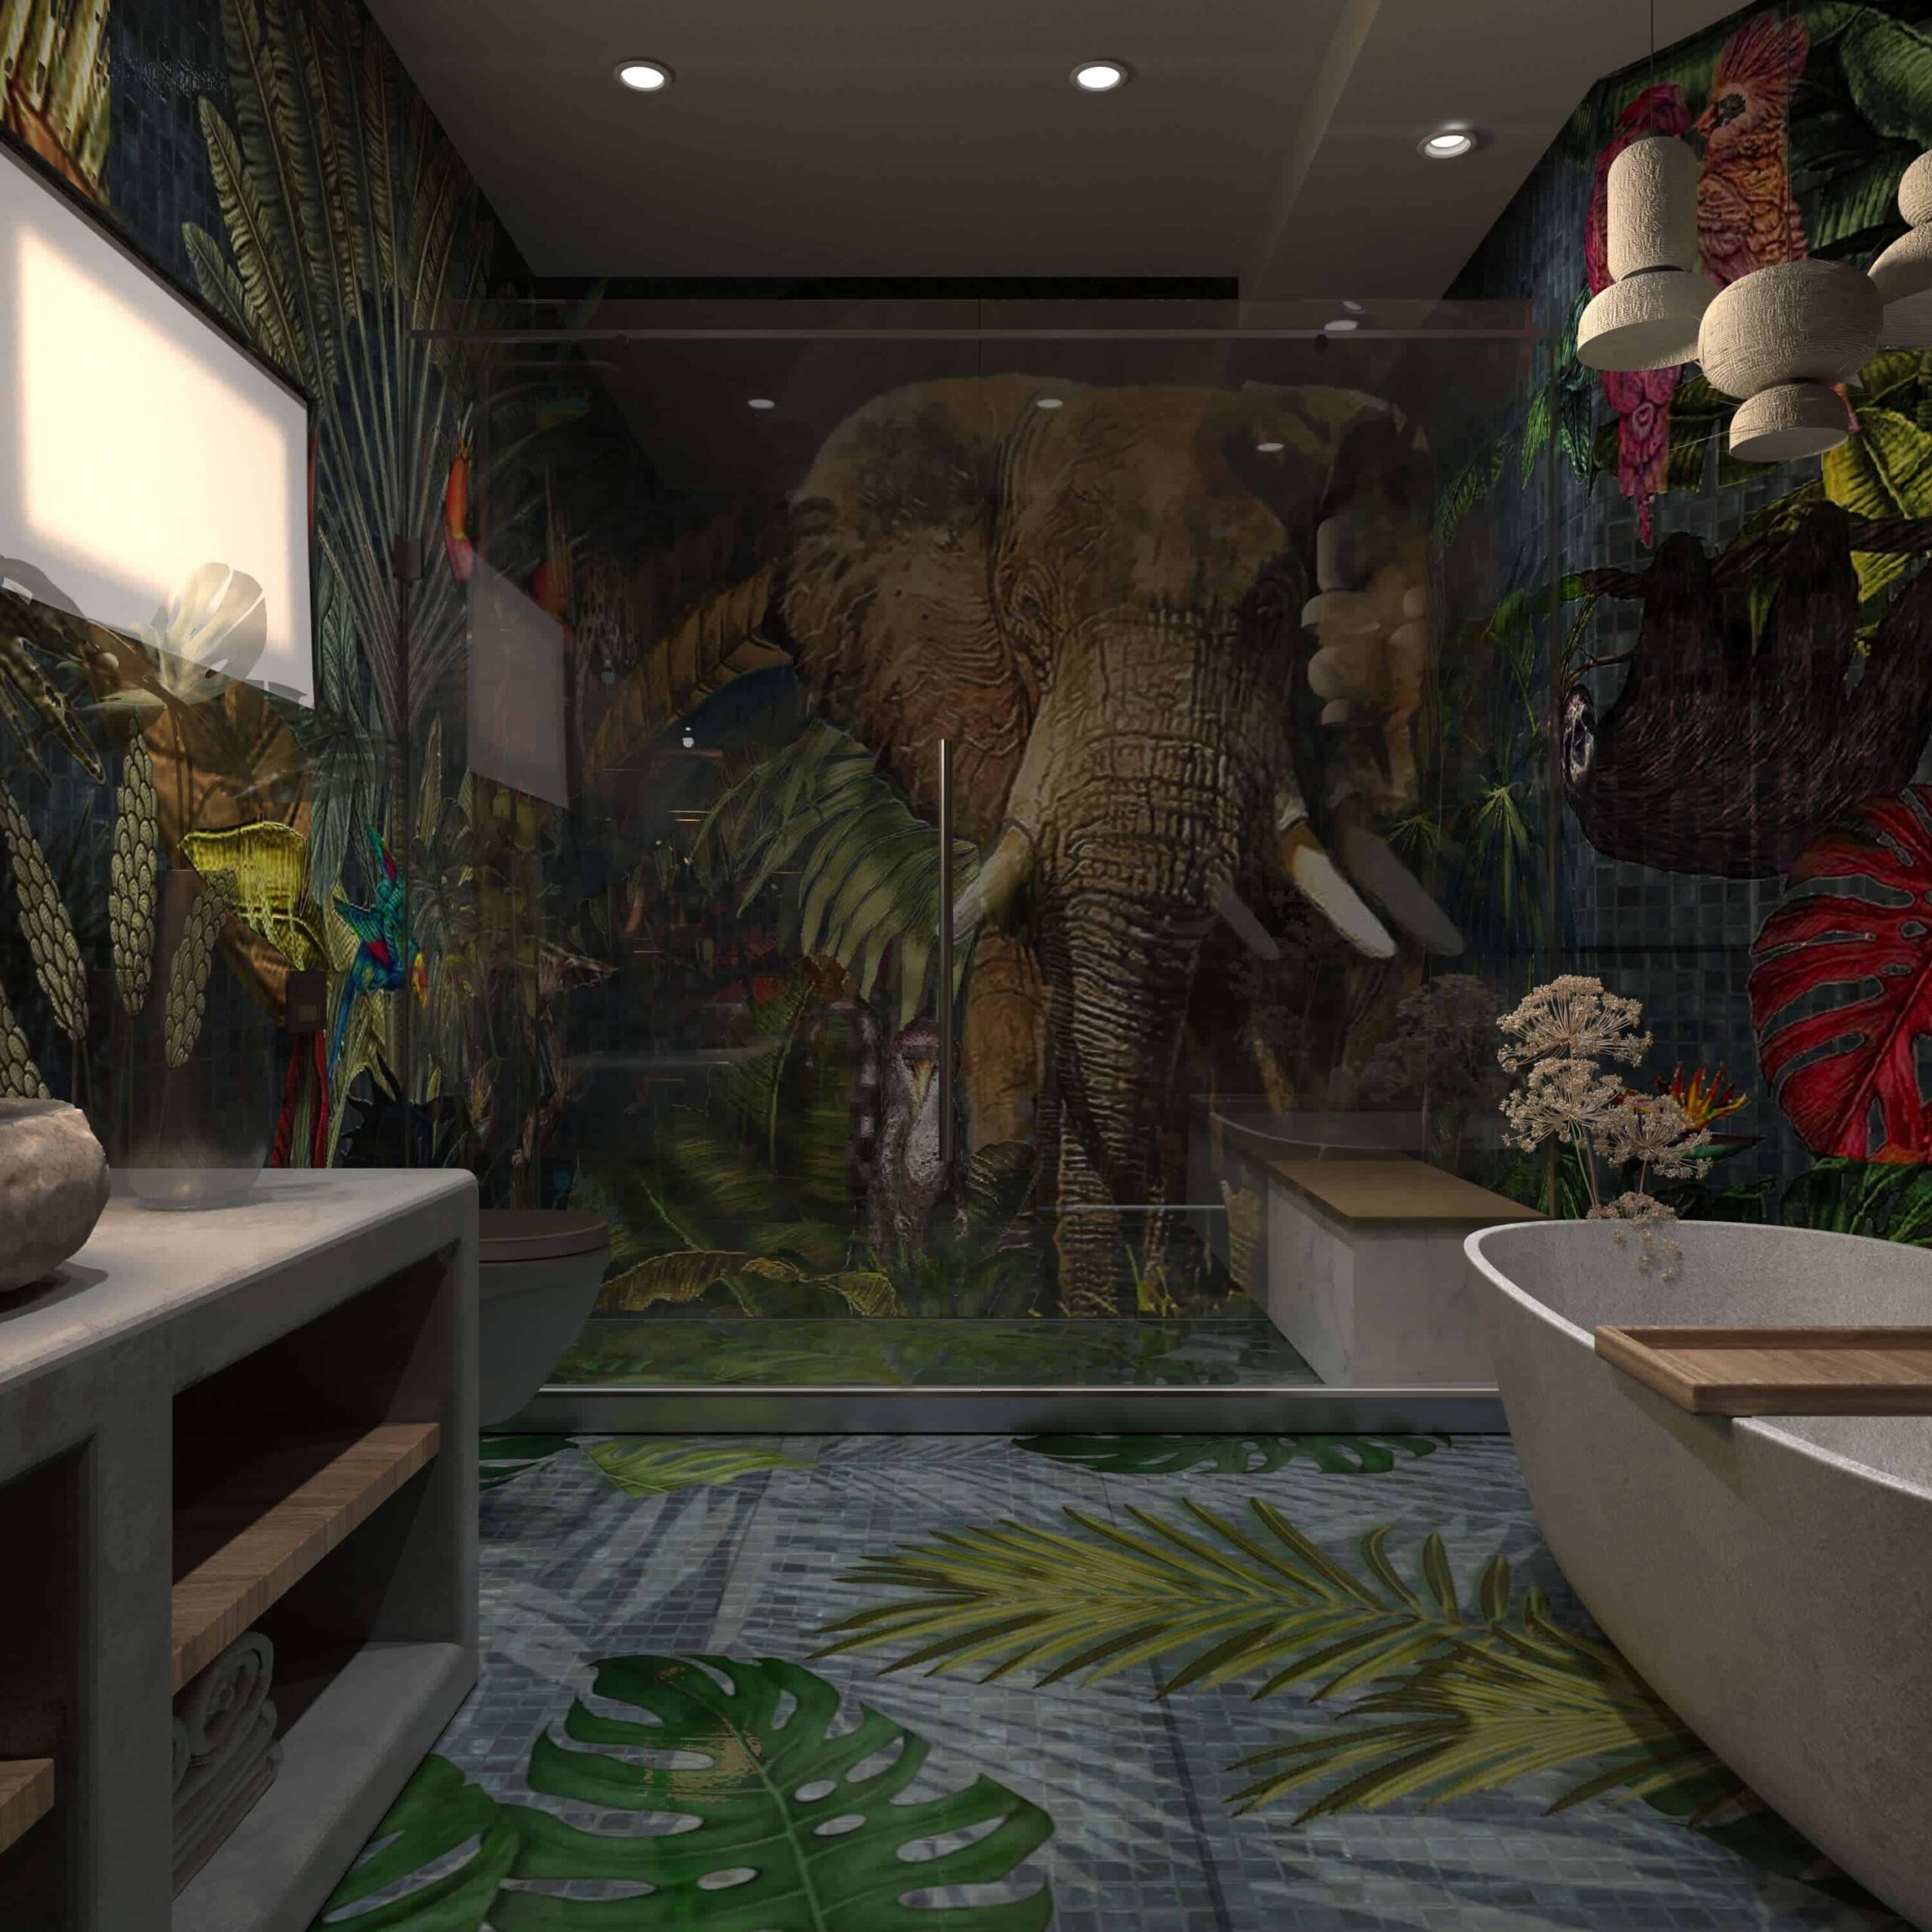 Jungle theme bathroom wall and floor mosaic artwork featuring tropical plants, leaves and mosaic animals such as elephants